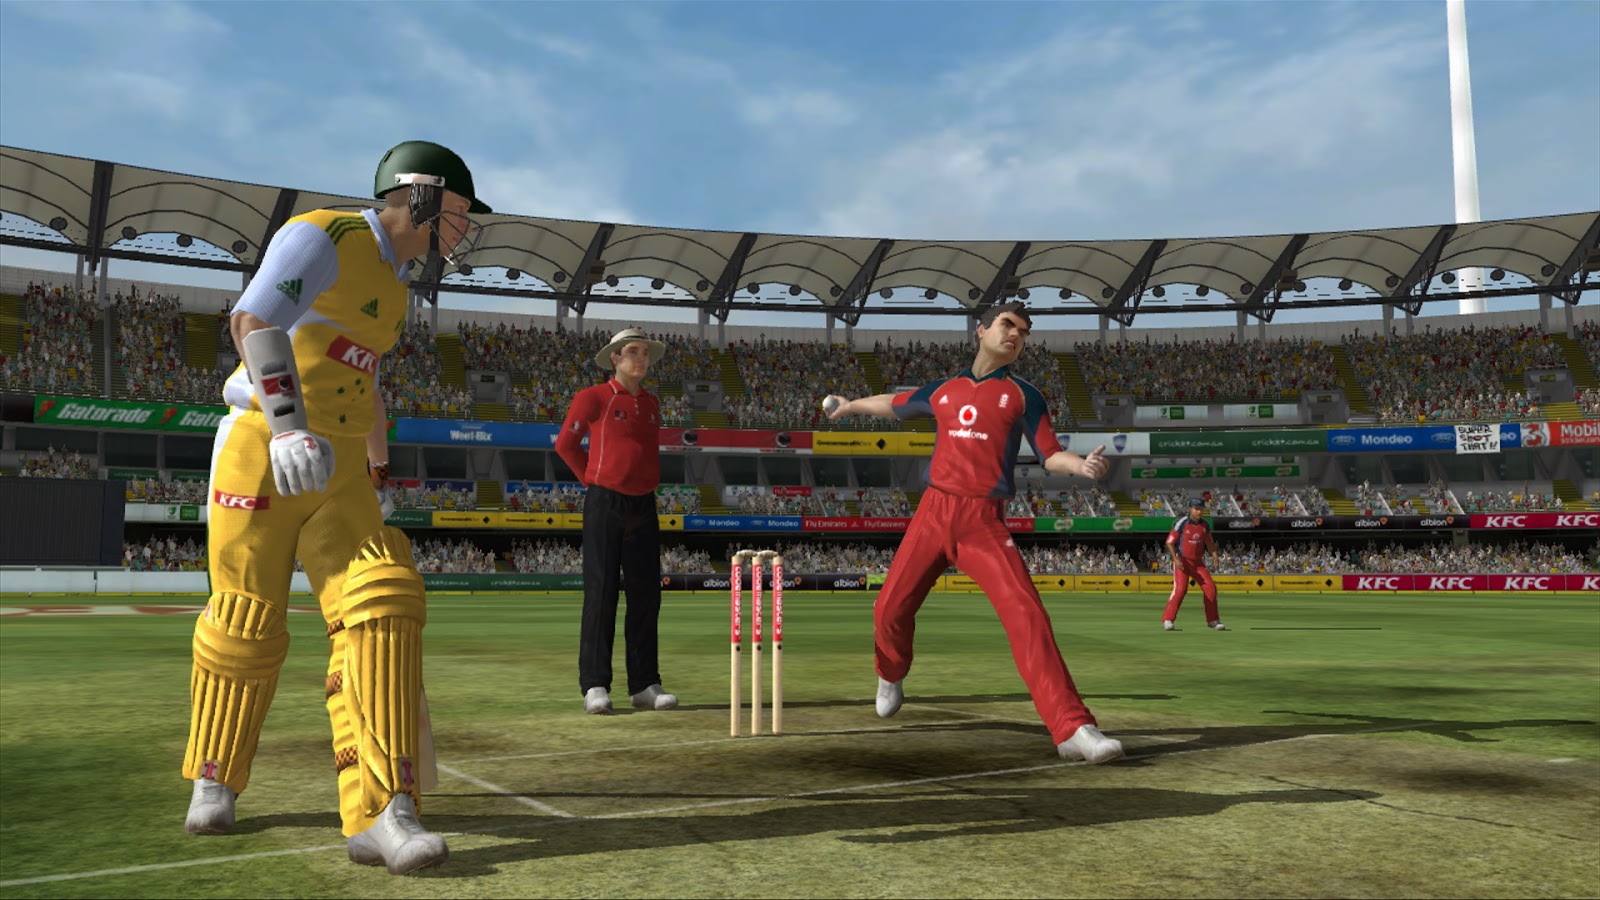 Ashes cricket 2016 game online